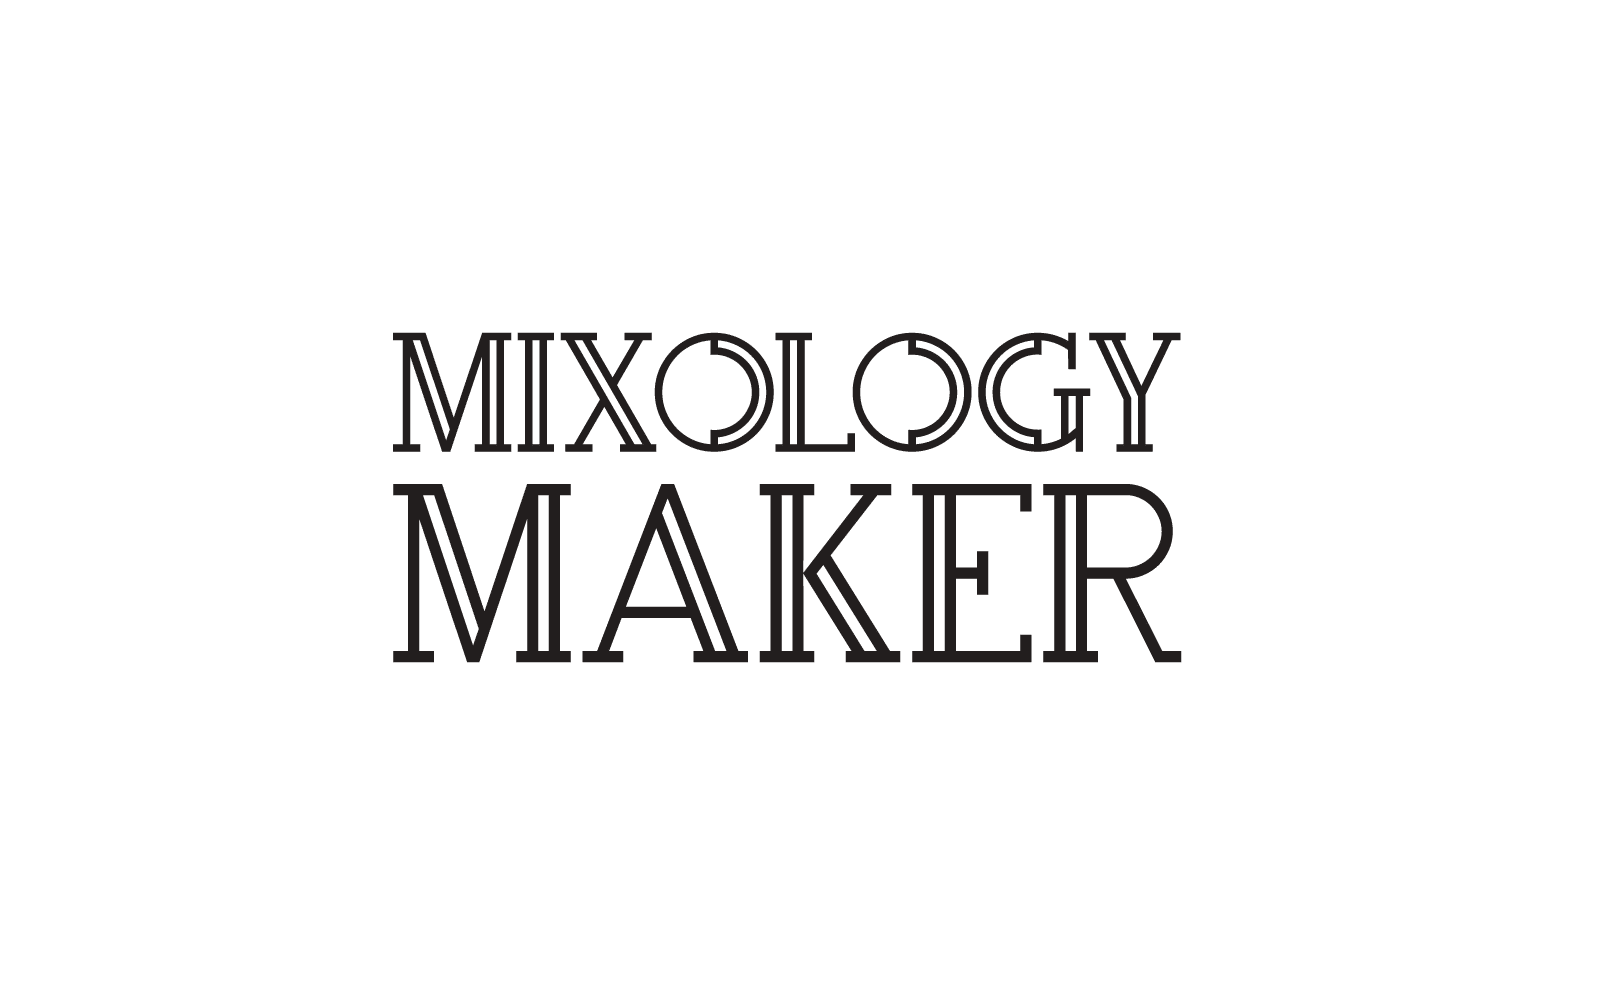 Mixology Maker casual logo design in black and white with slab serif font and hand drawn martini glass element.